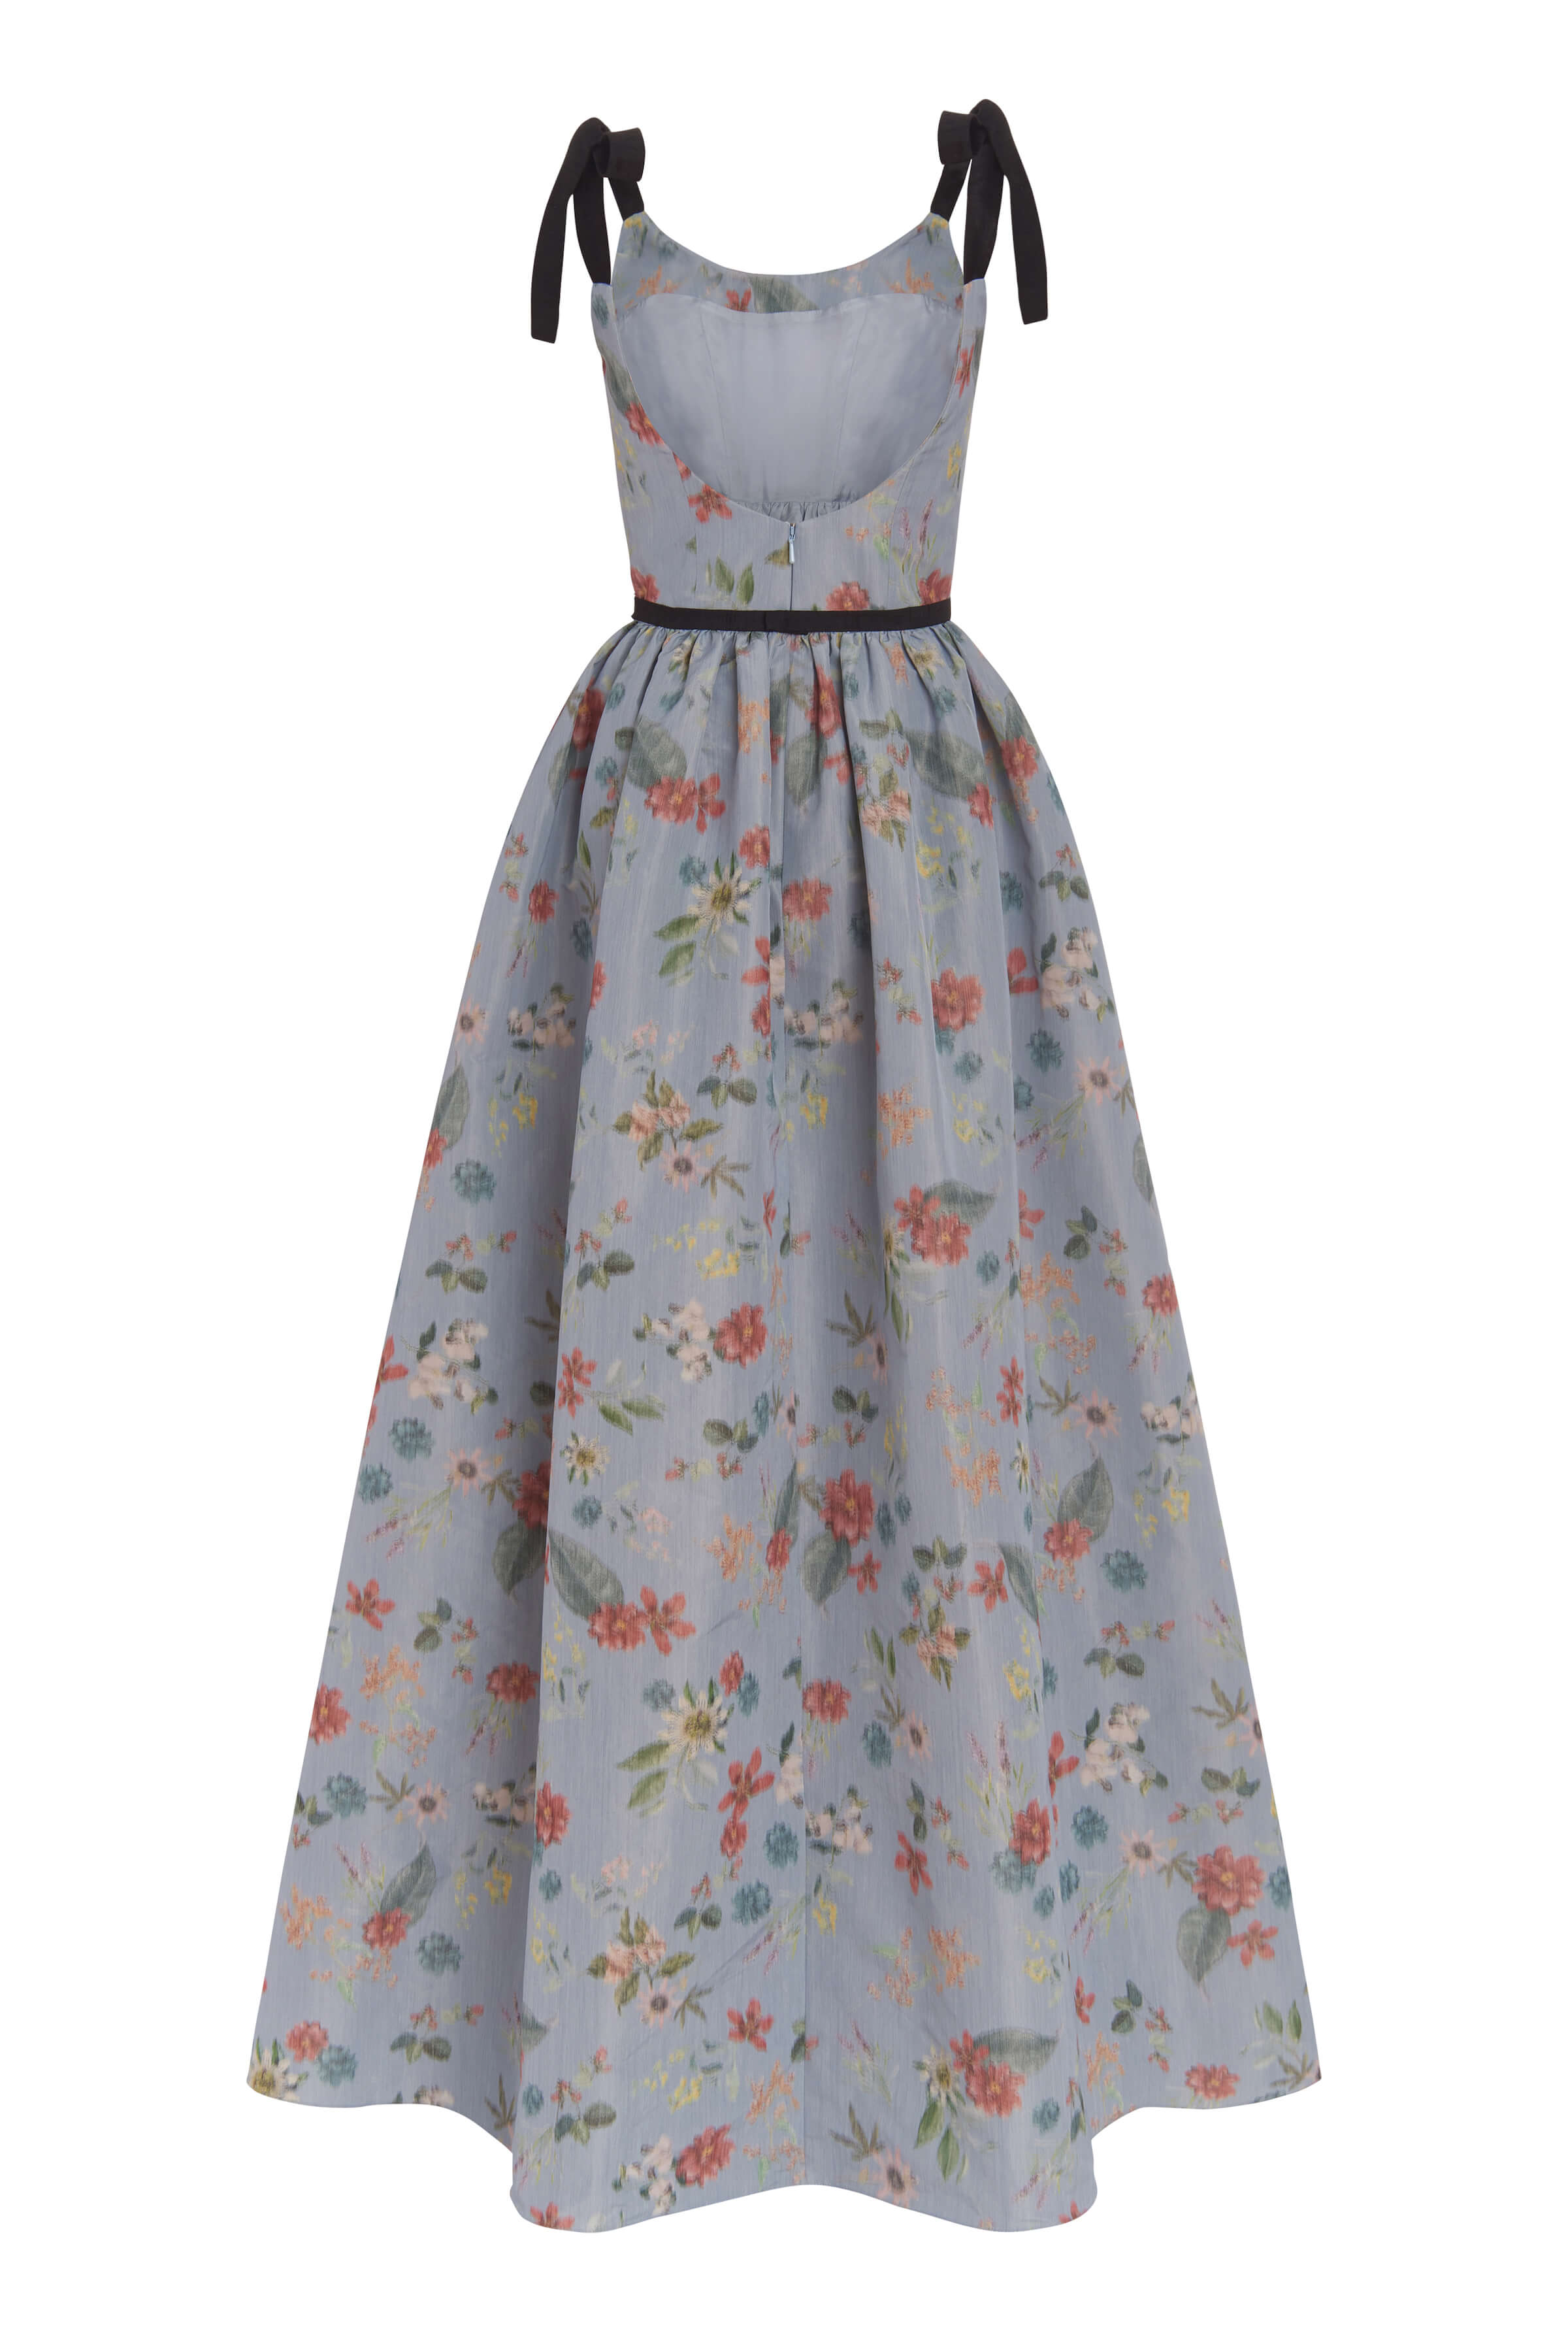 Tatiana Blue Floral Ikat Tie Strap Full Skirt Corset Gown With Belt Detail